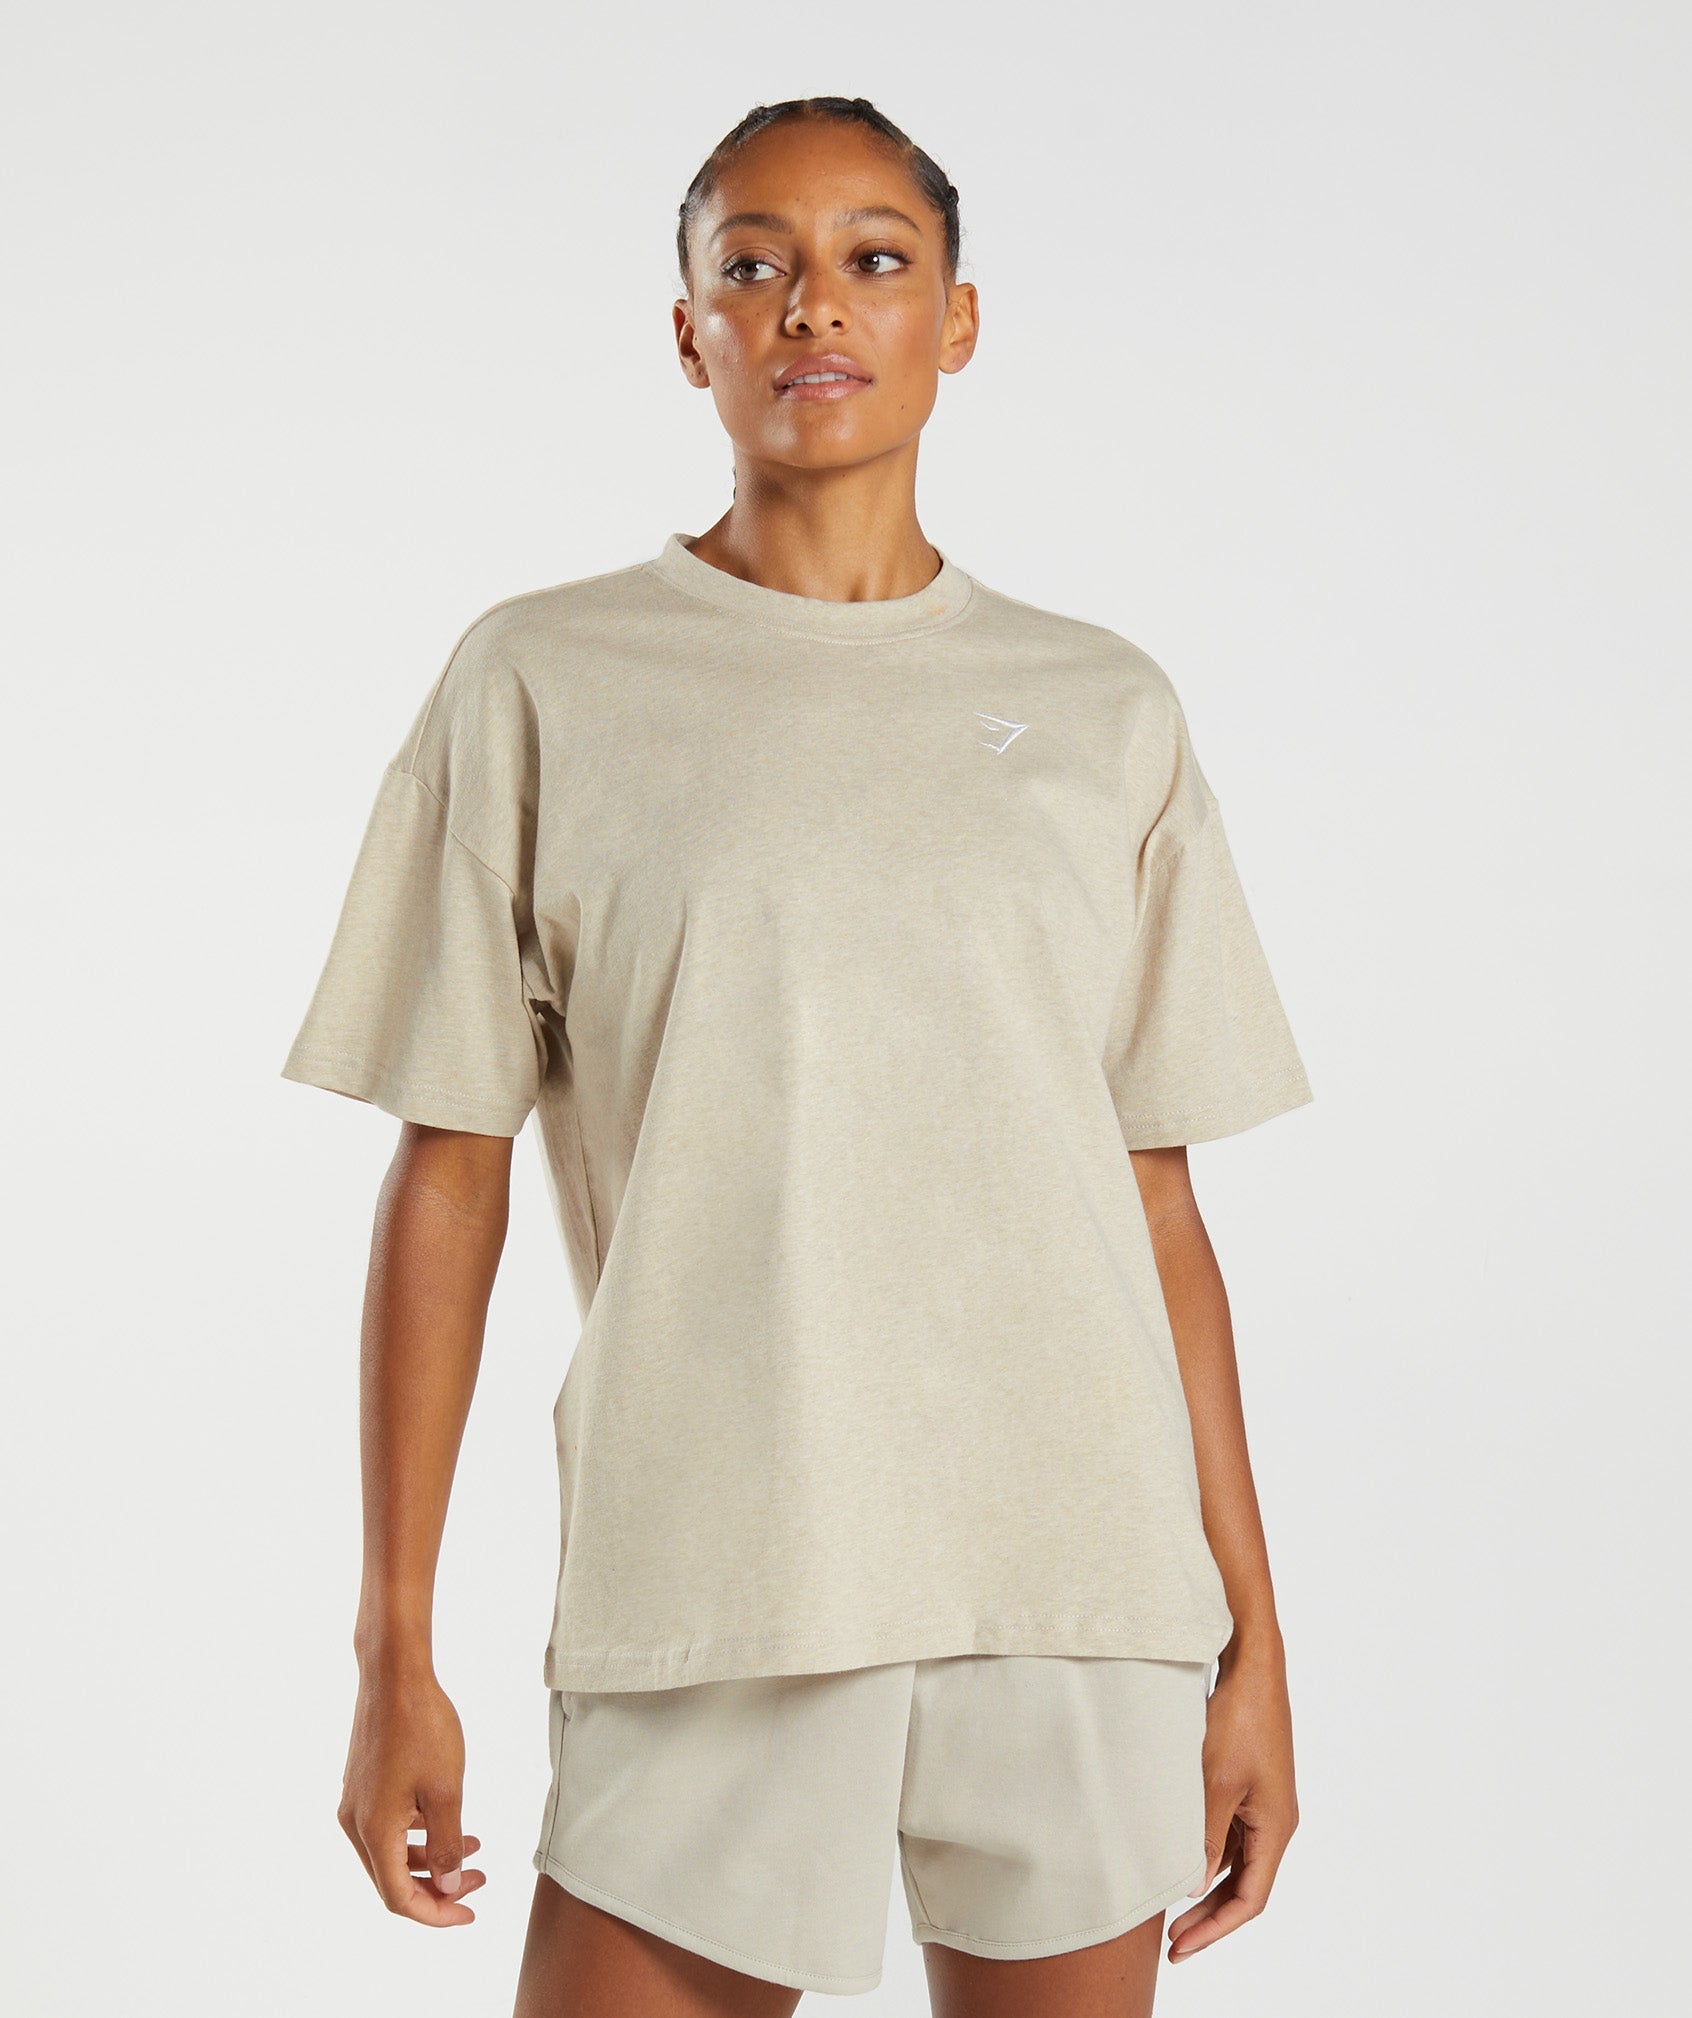 Training Oversized T-shirt in Sand Marl - view 1